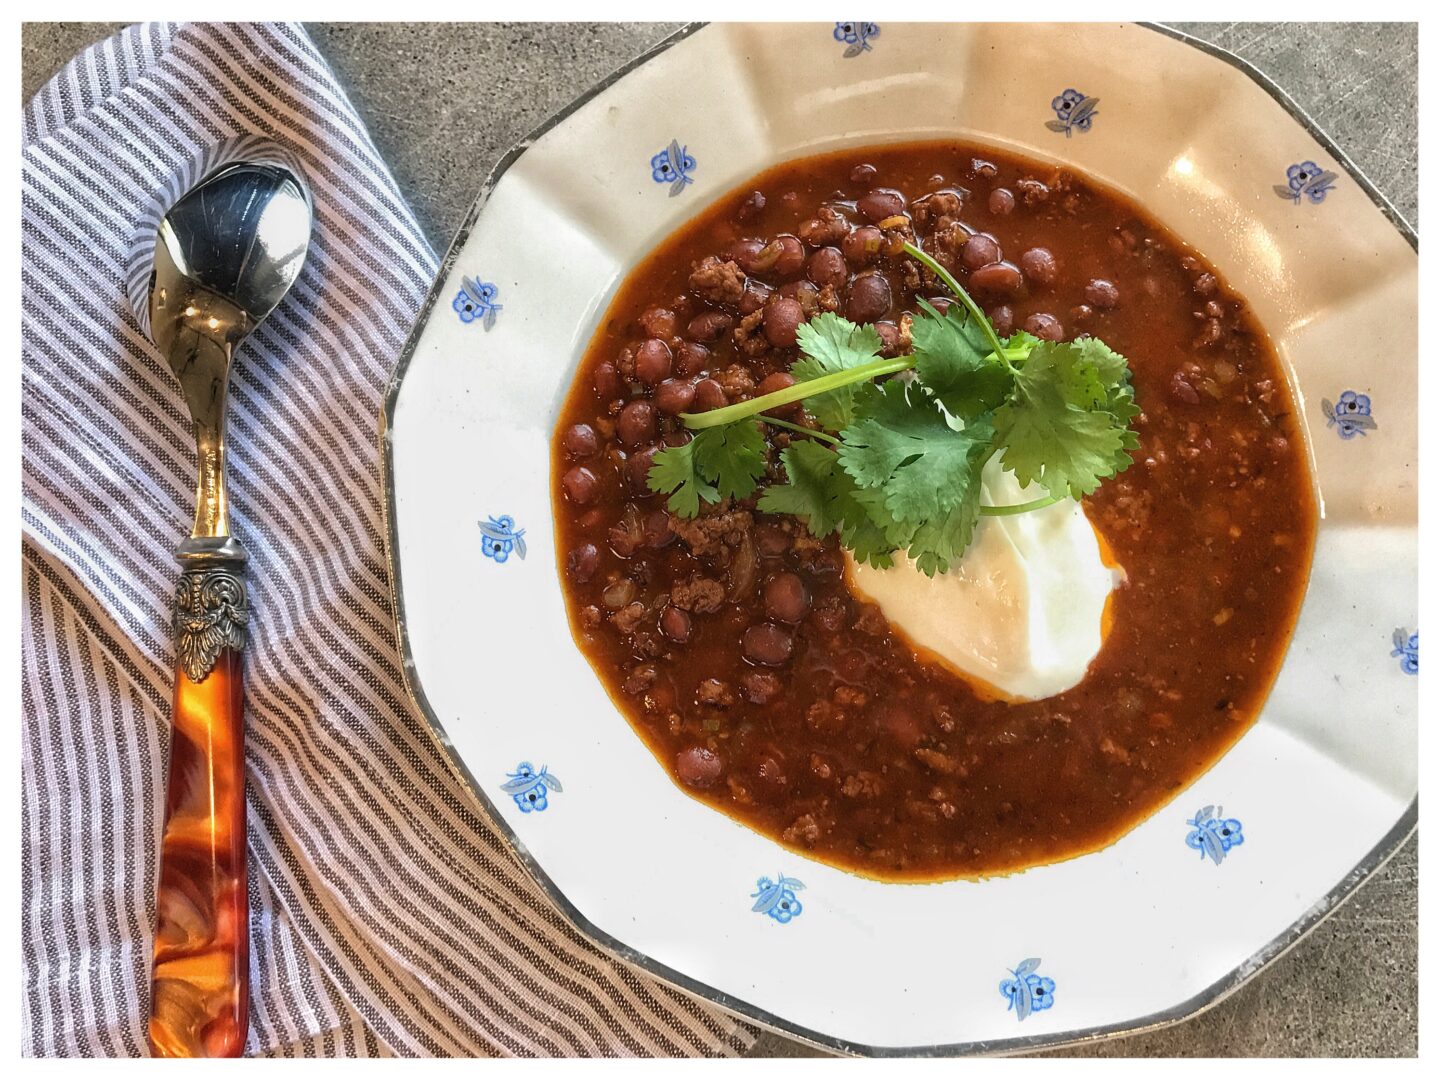 A bowl of chili with sour cream and a spoon.